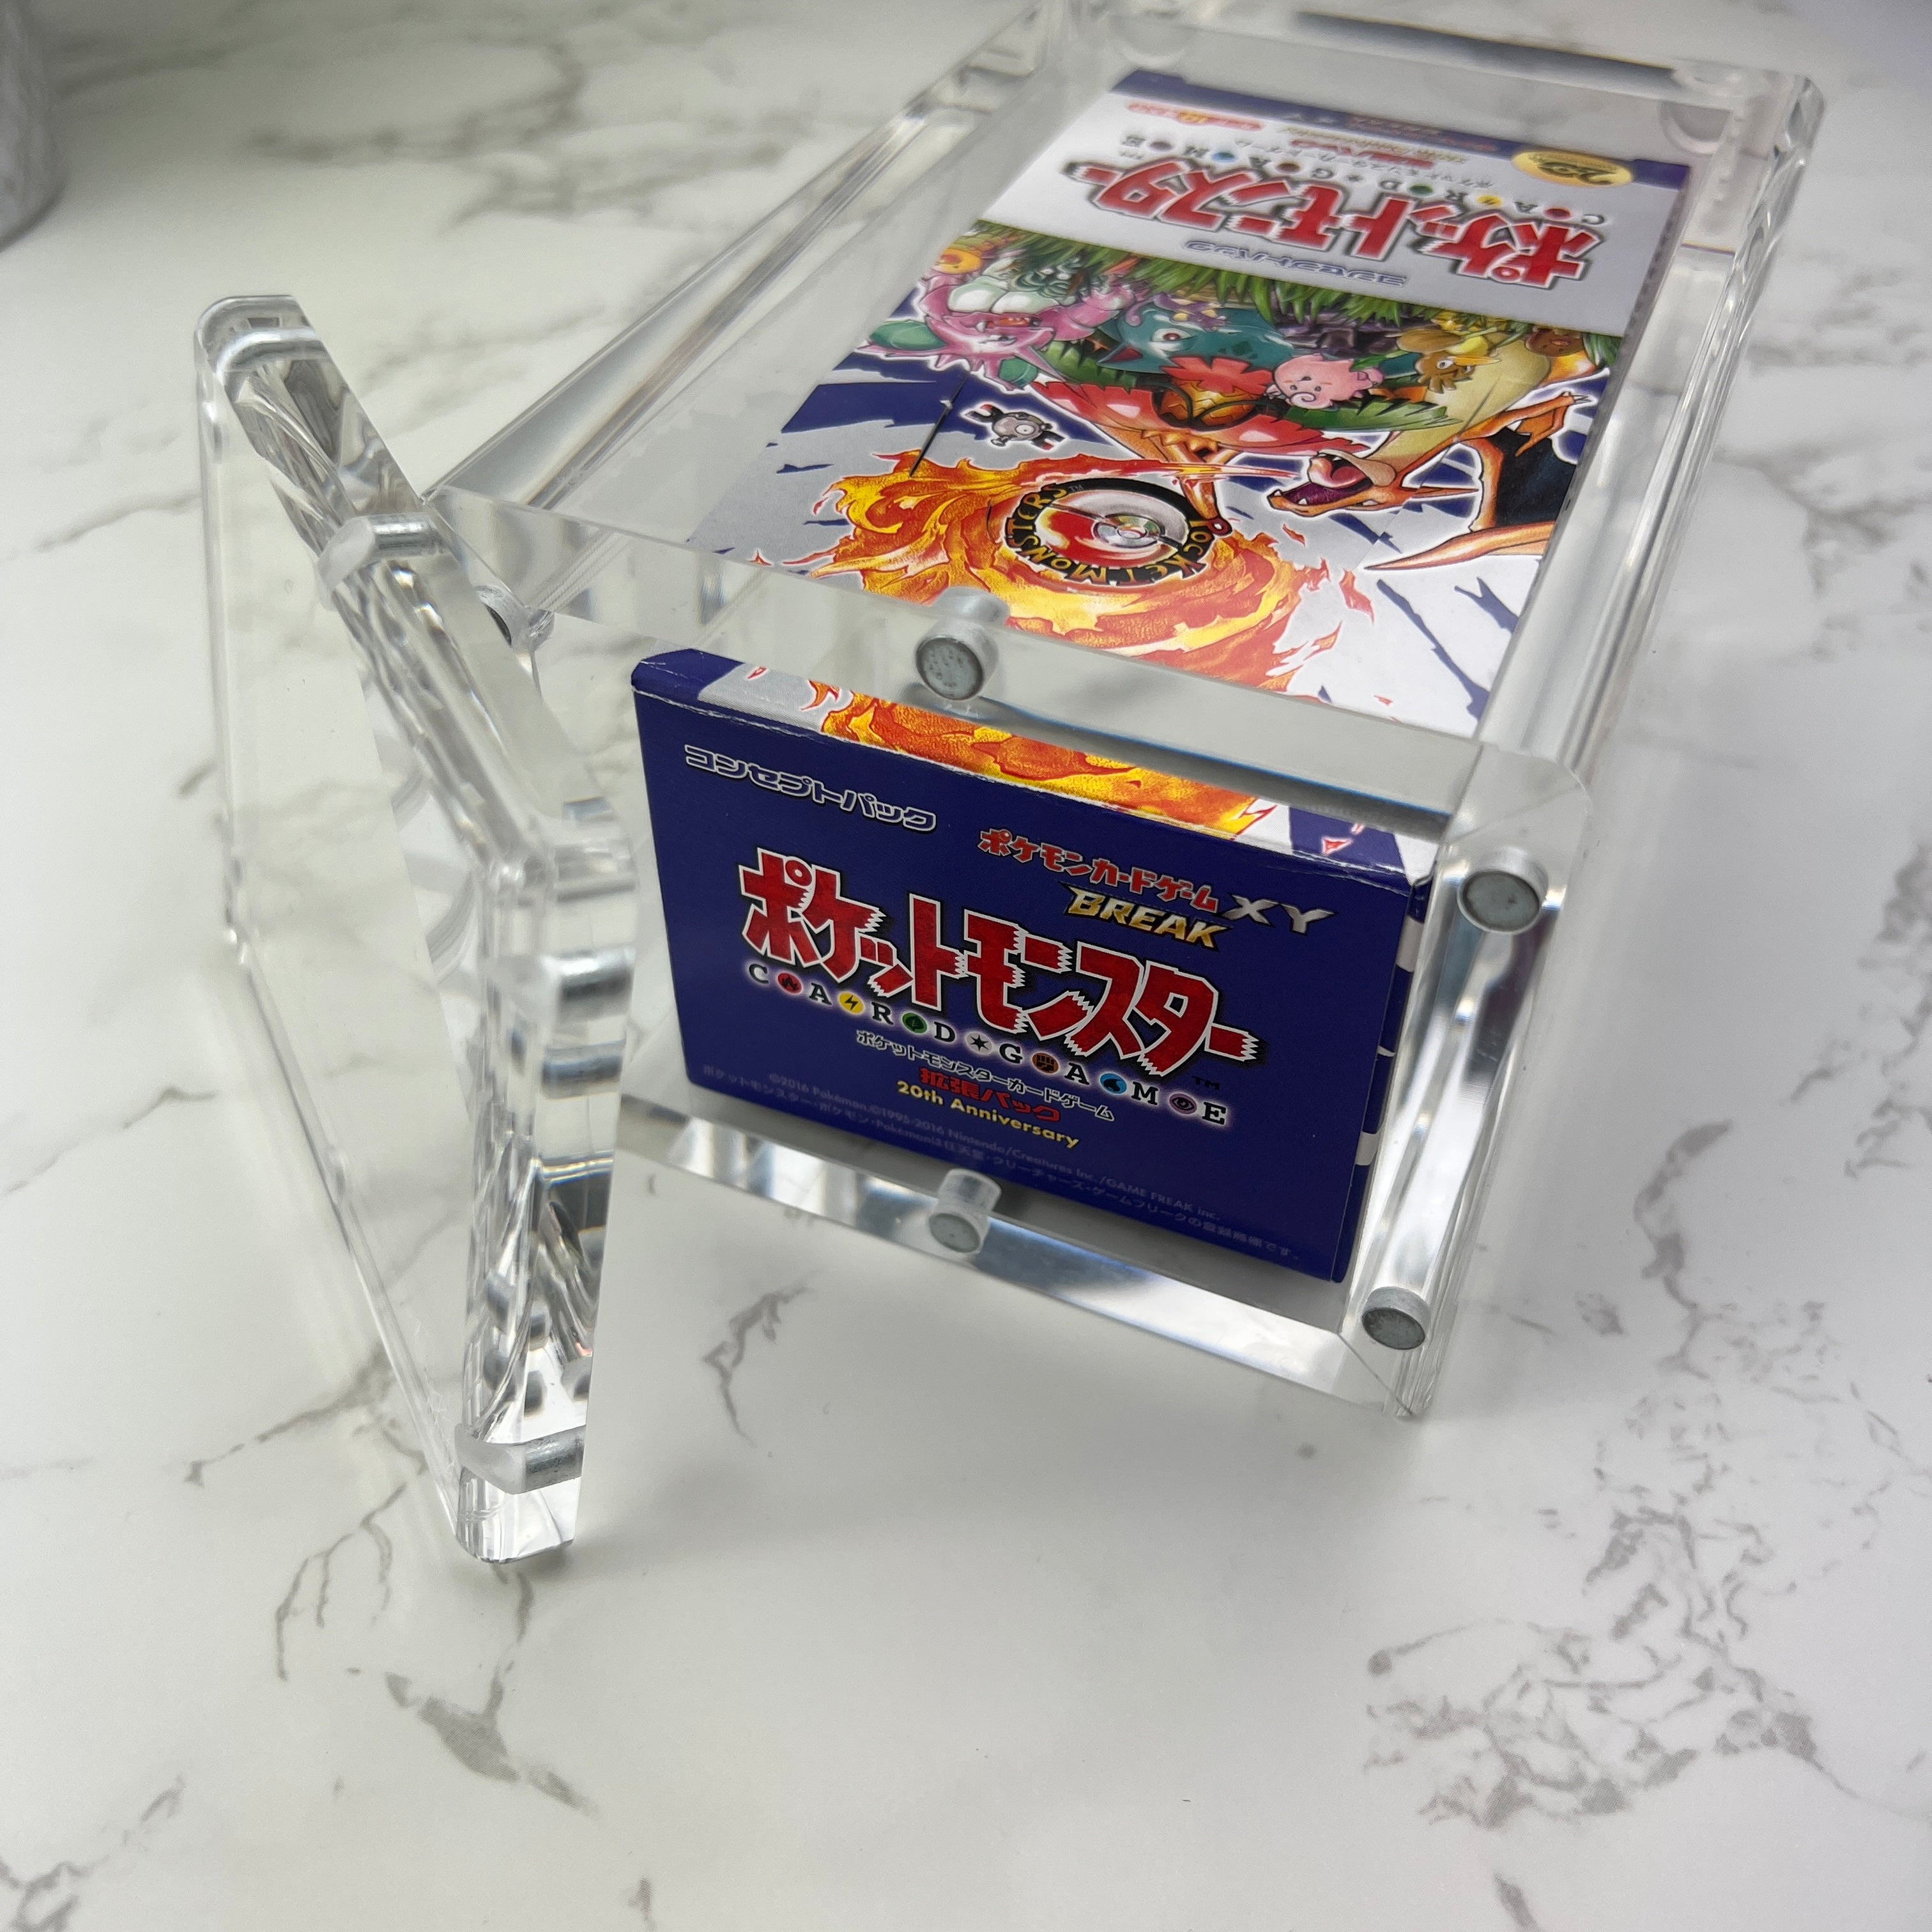 Pokemon Japanese booster box XY magnetic acrylic protective cases. Crystal clear acrylic, with UV resistance.